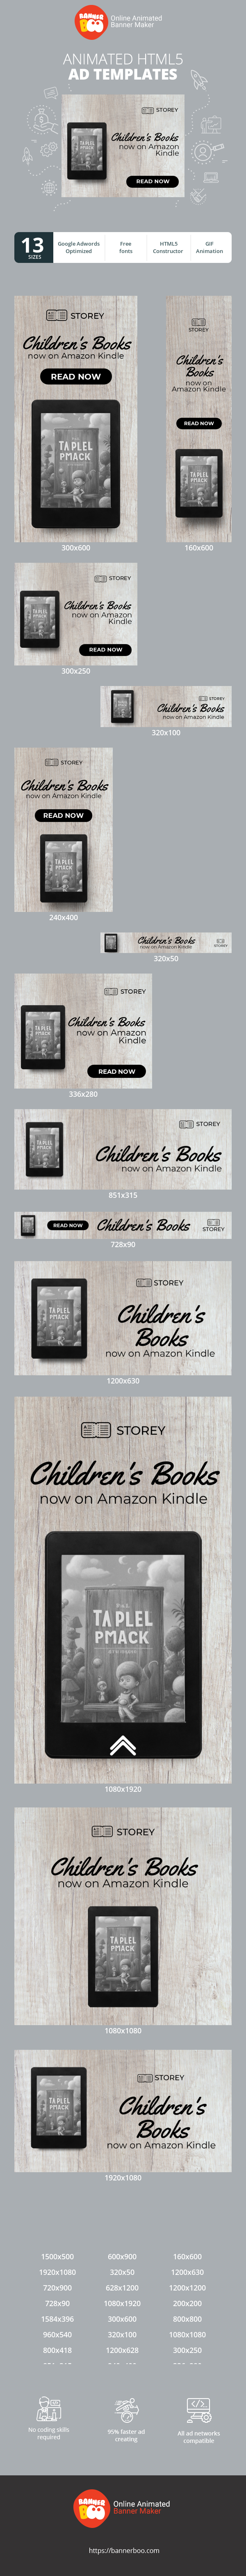 Banner ad template — Children's Book — Now On Amazon Kindle